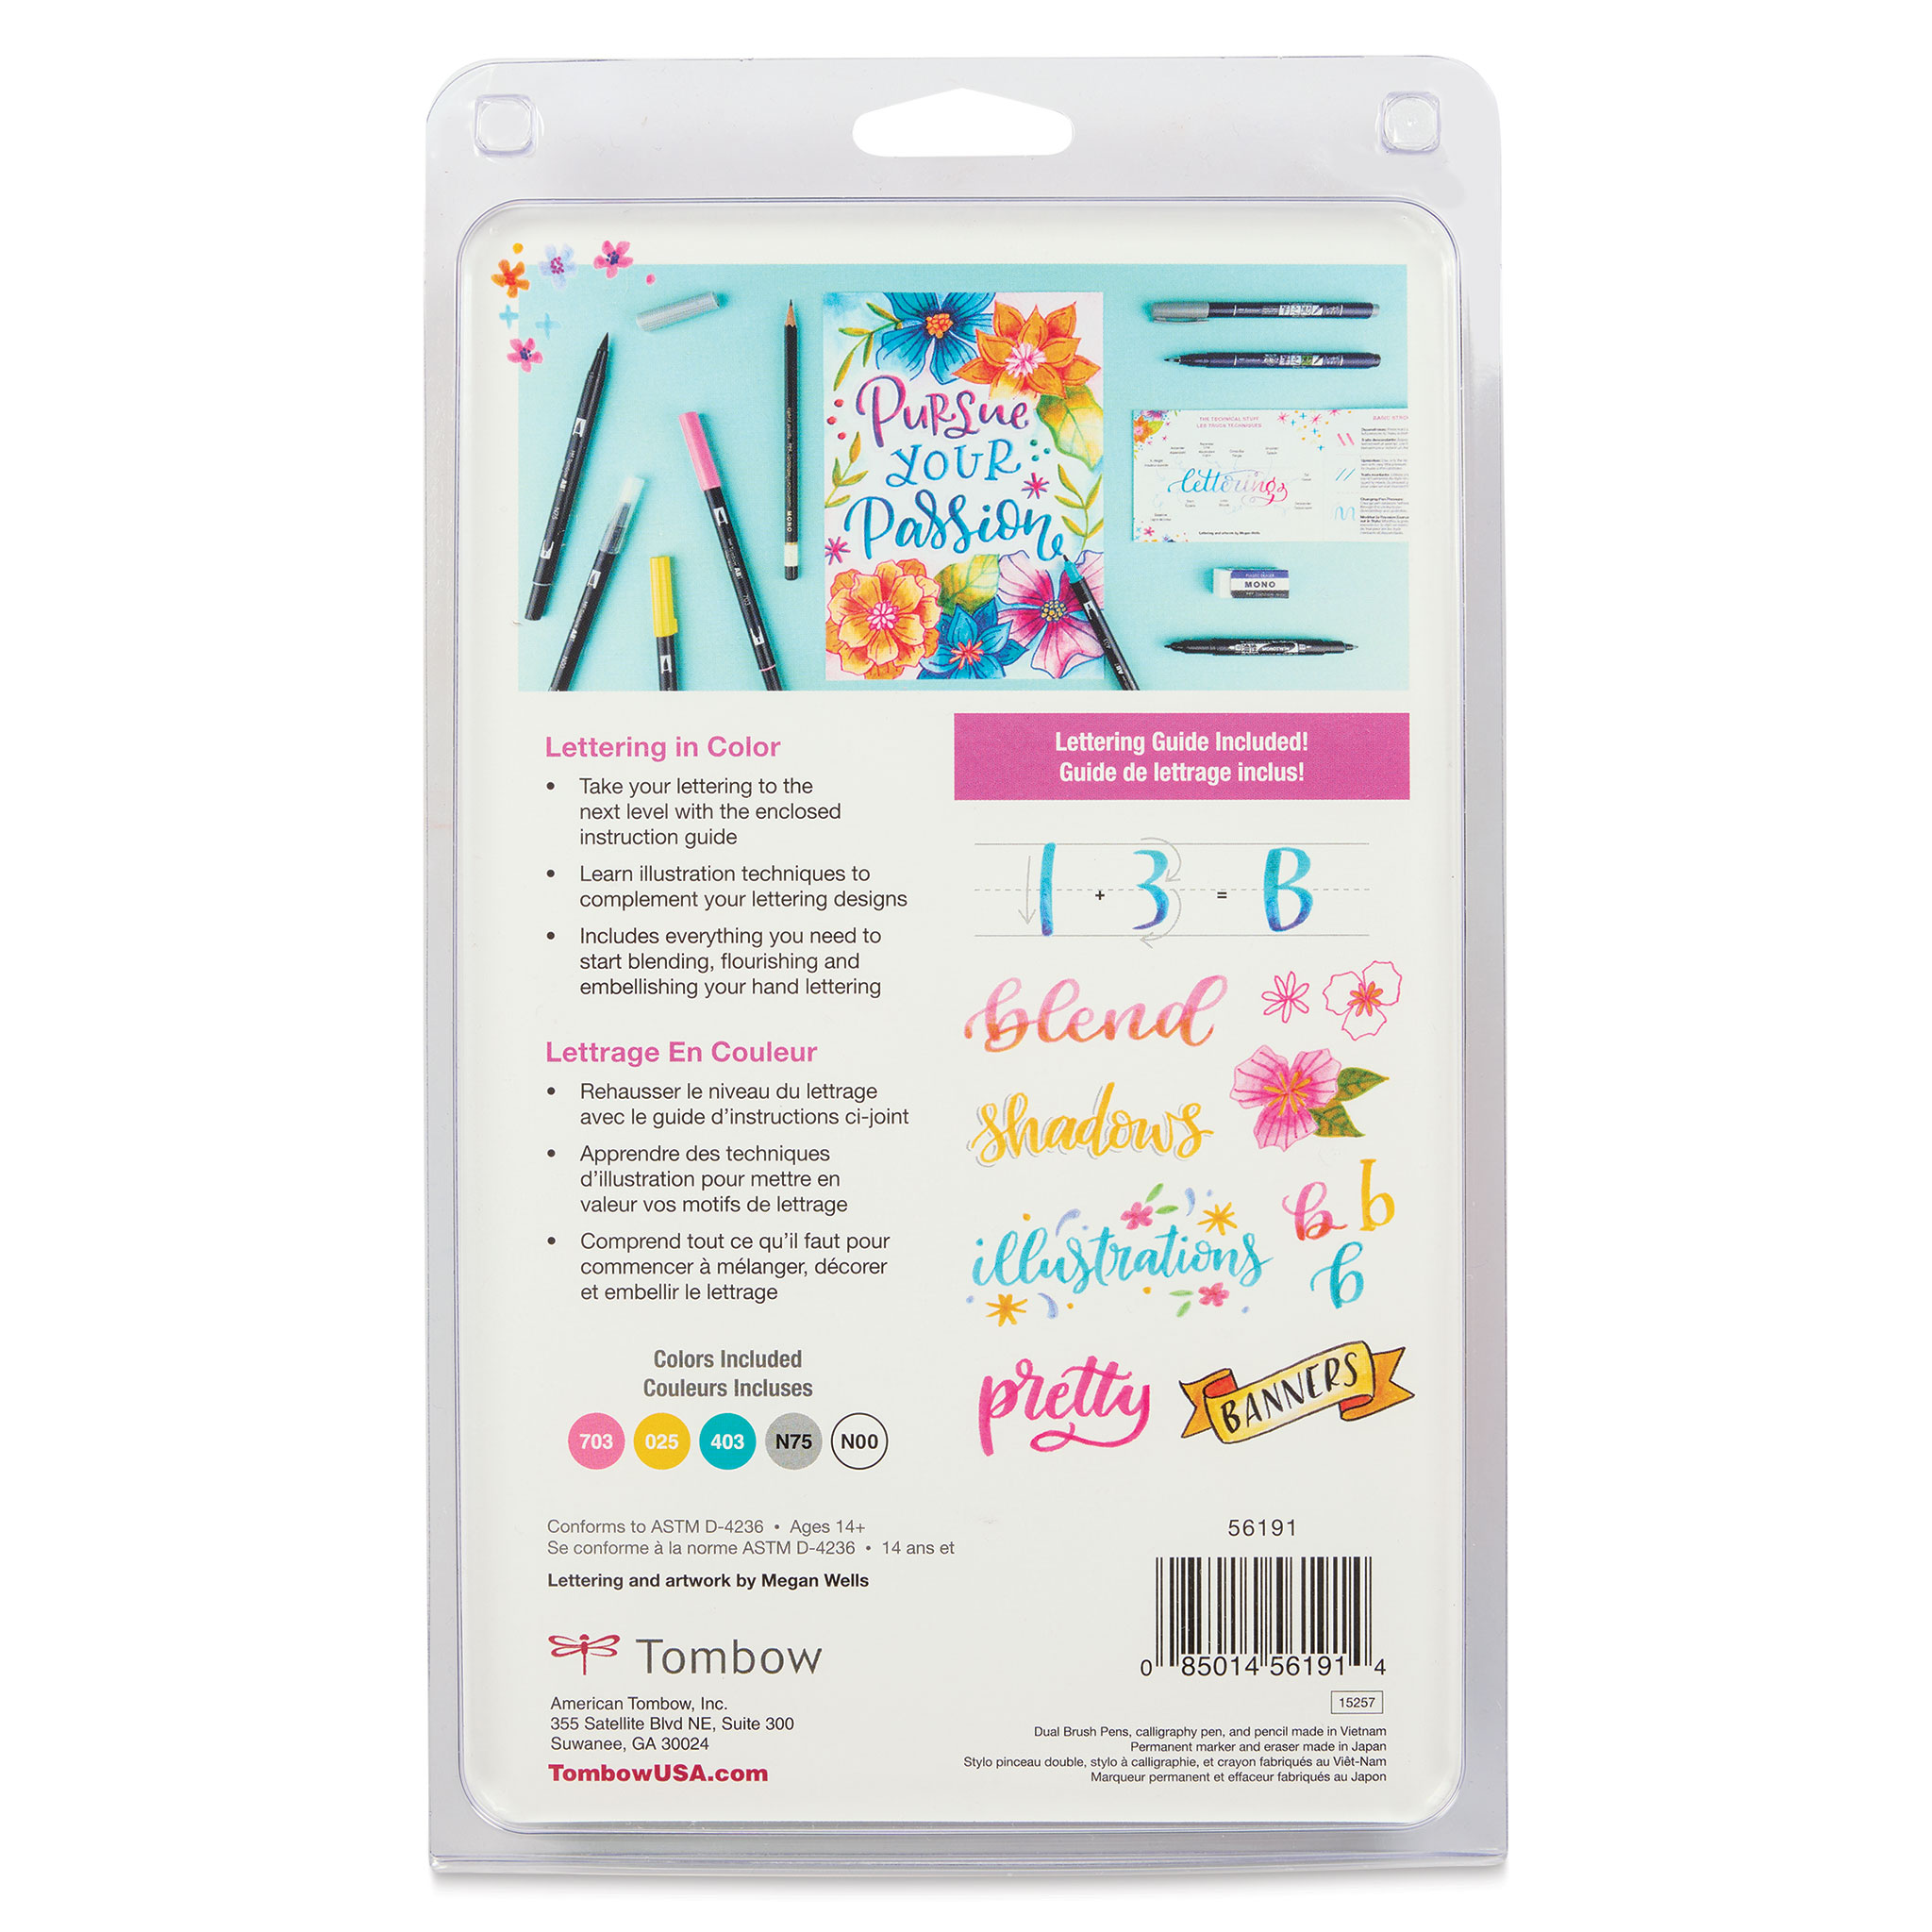  Tombow 56191 Advanced Lettering Set. Includes Need to Enhance  Your Hand Lettering